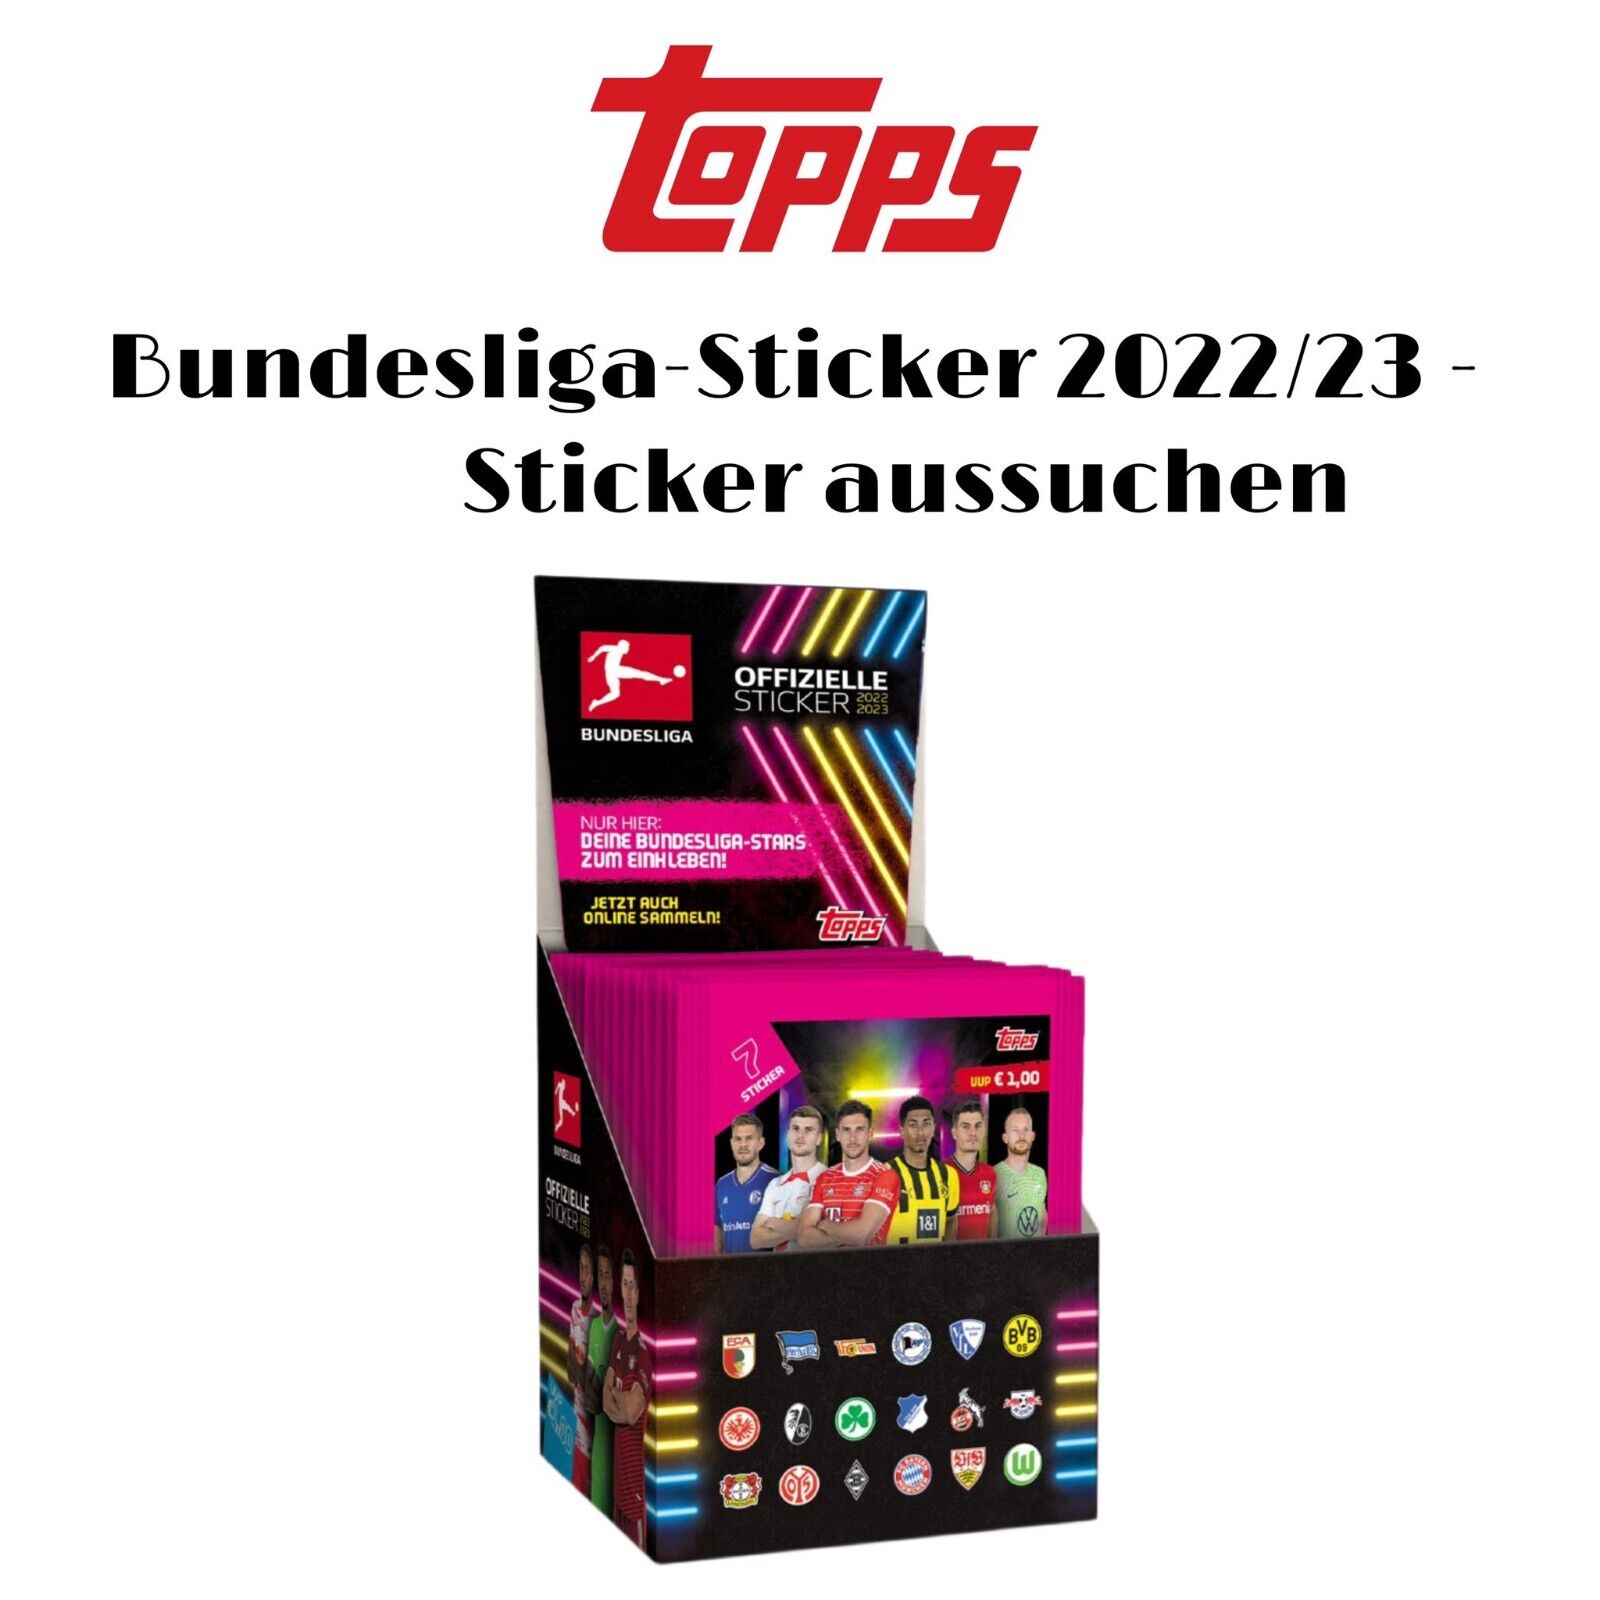 Topps Bundesliga Sticker 2022/23 - Choose Any Number of Stickers